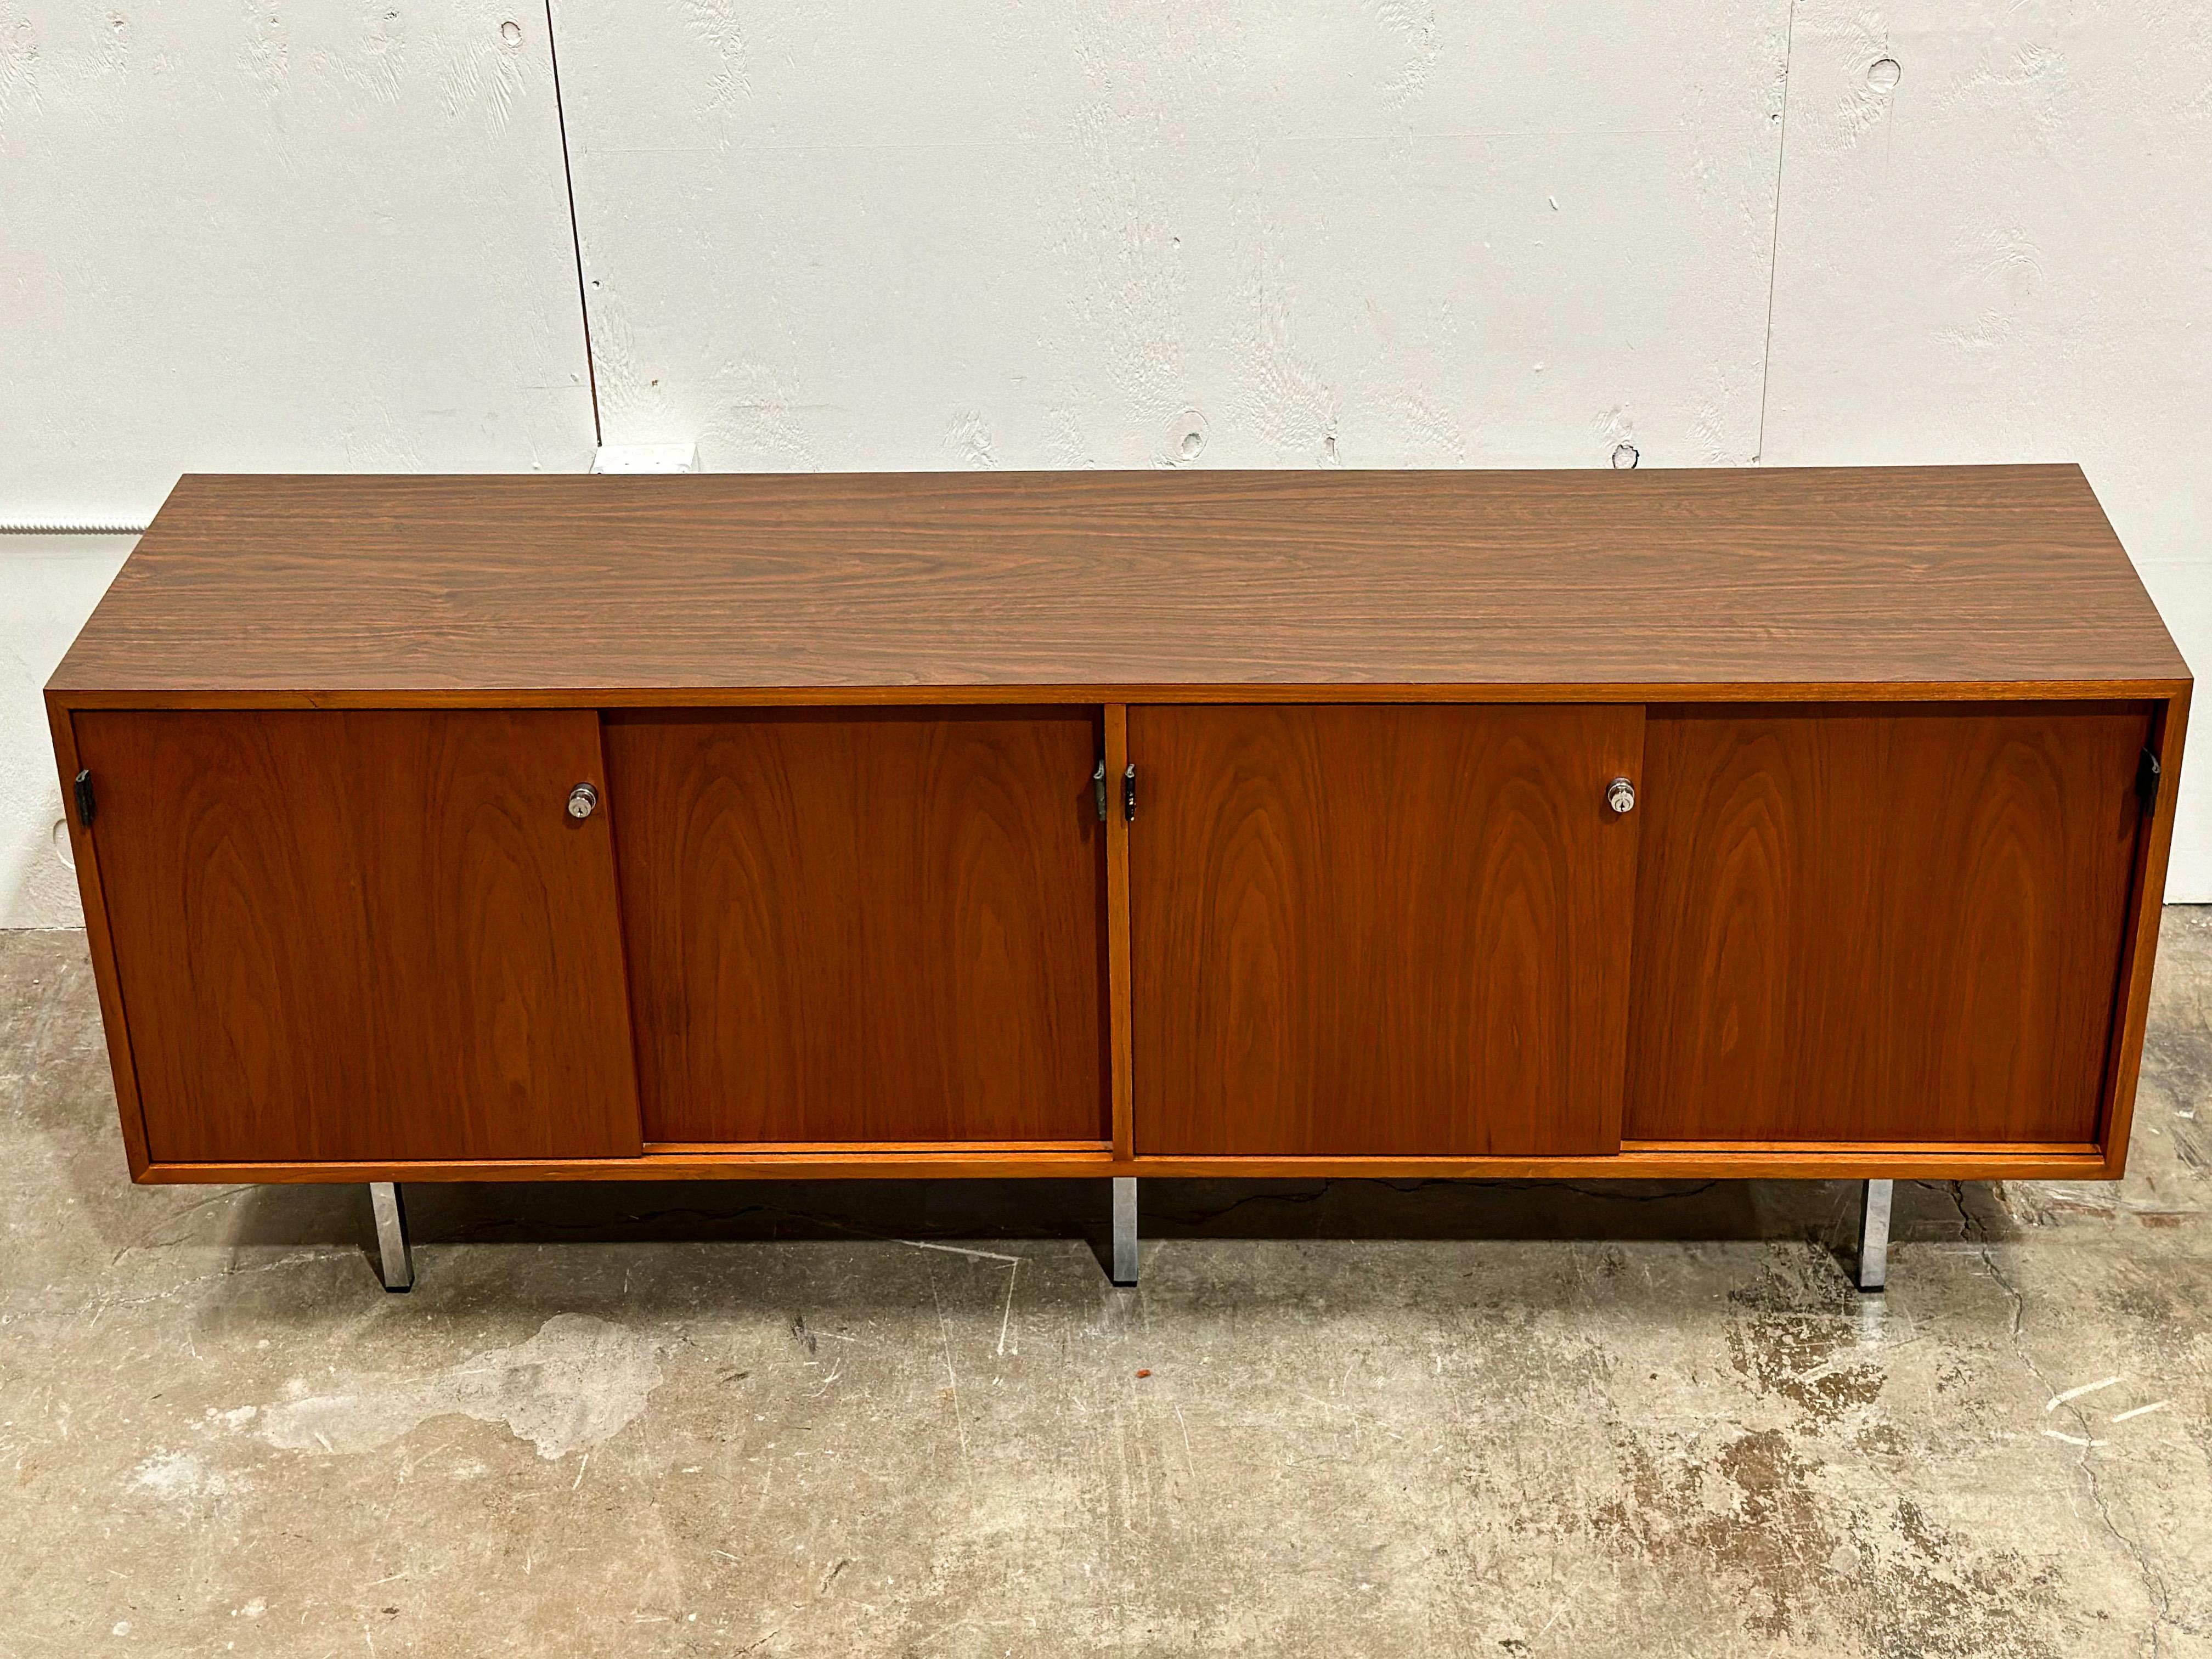 Vintage Midcentury Florence Knoll Credenza - Walnut + Chrome + Leather For Sale 3